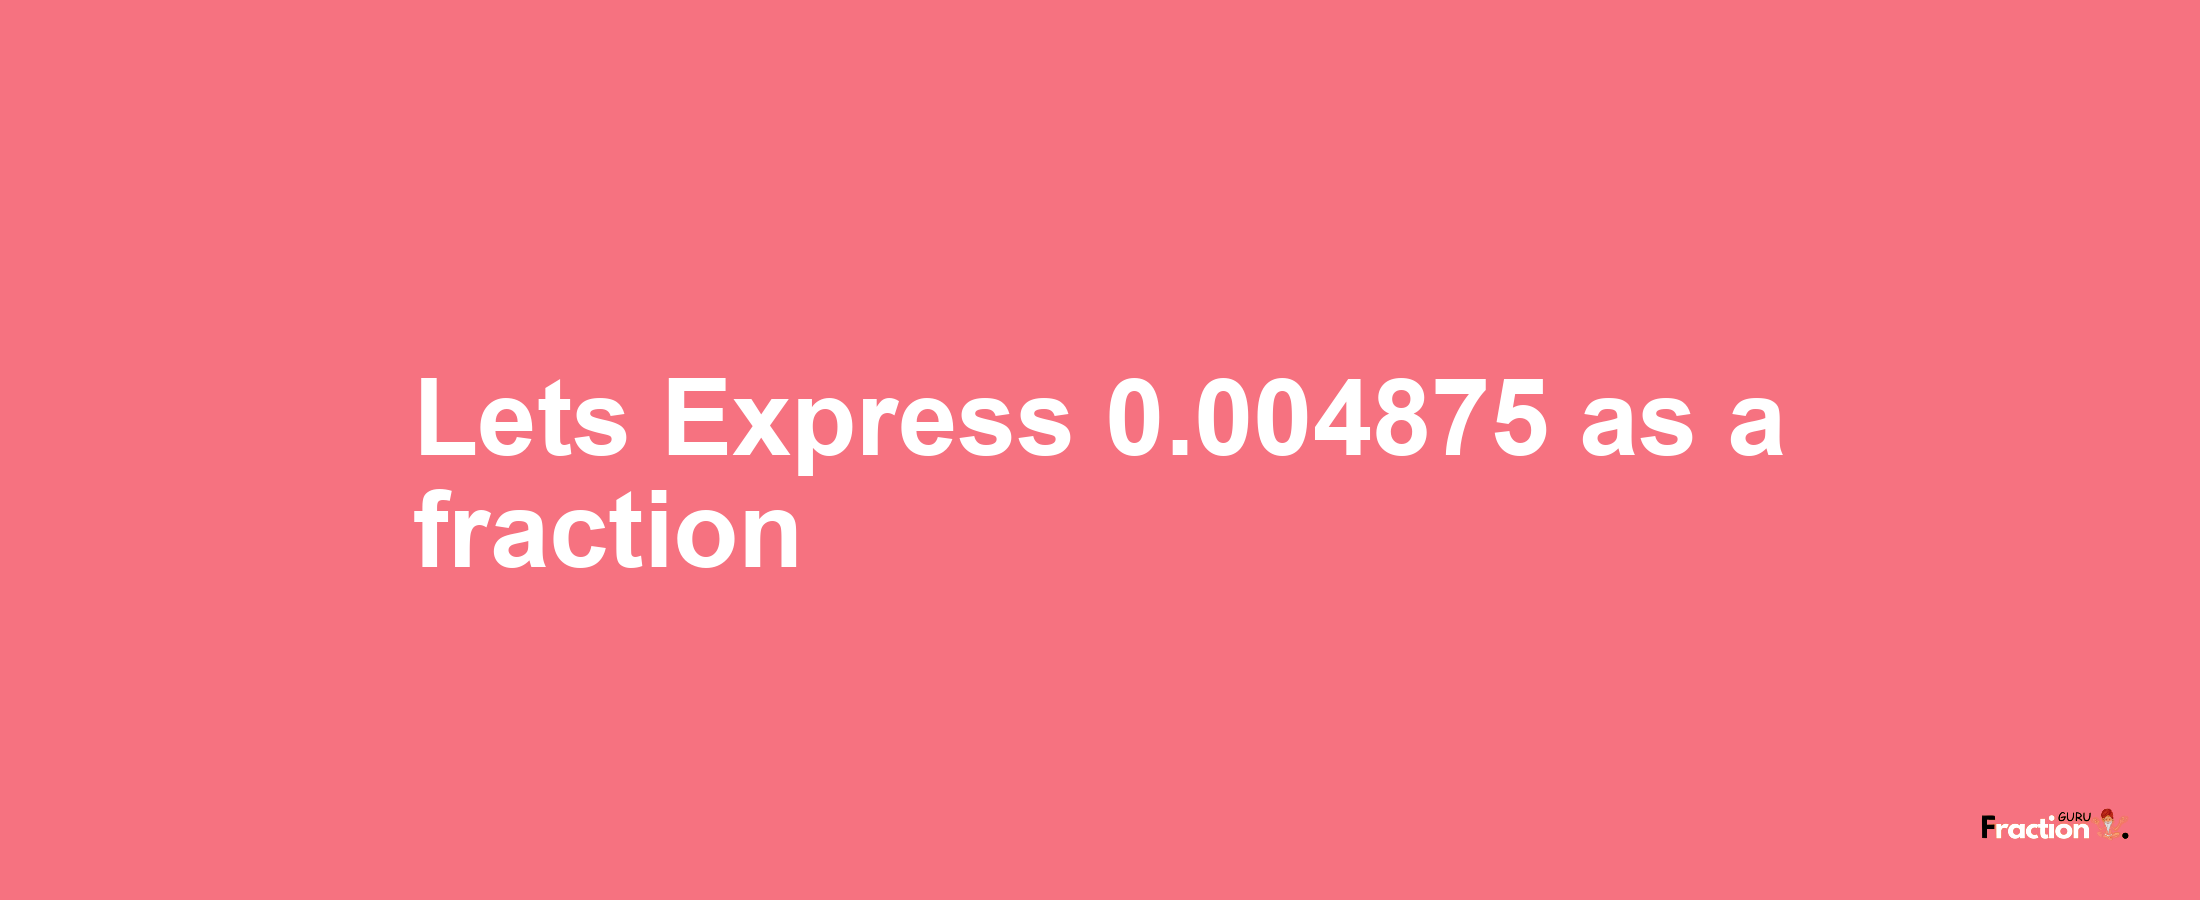 Lets Express 0.004875 as afraction